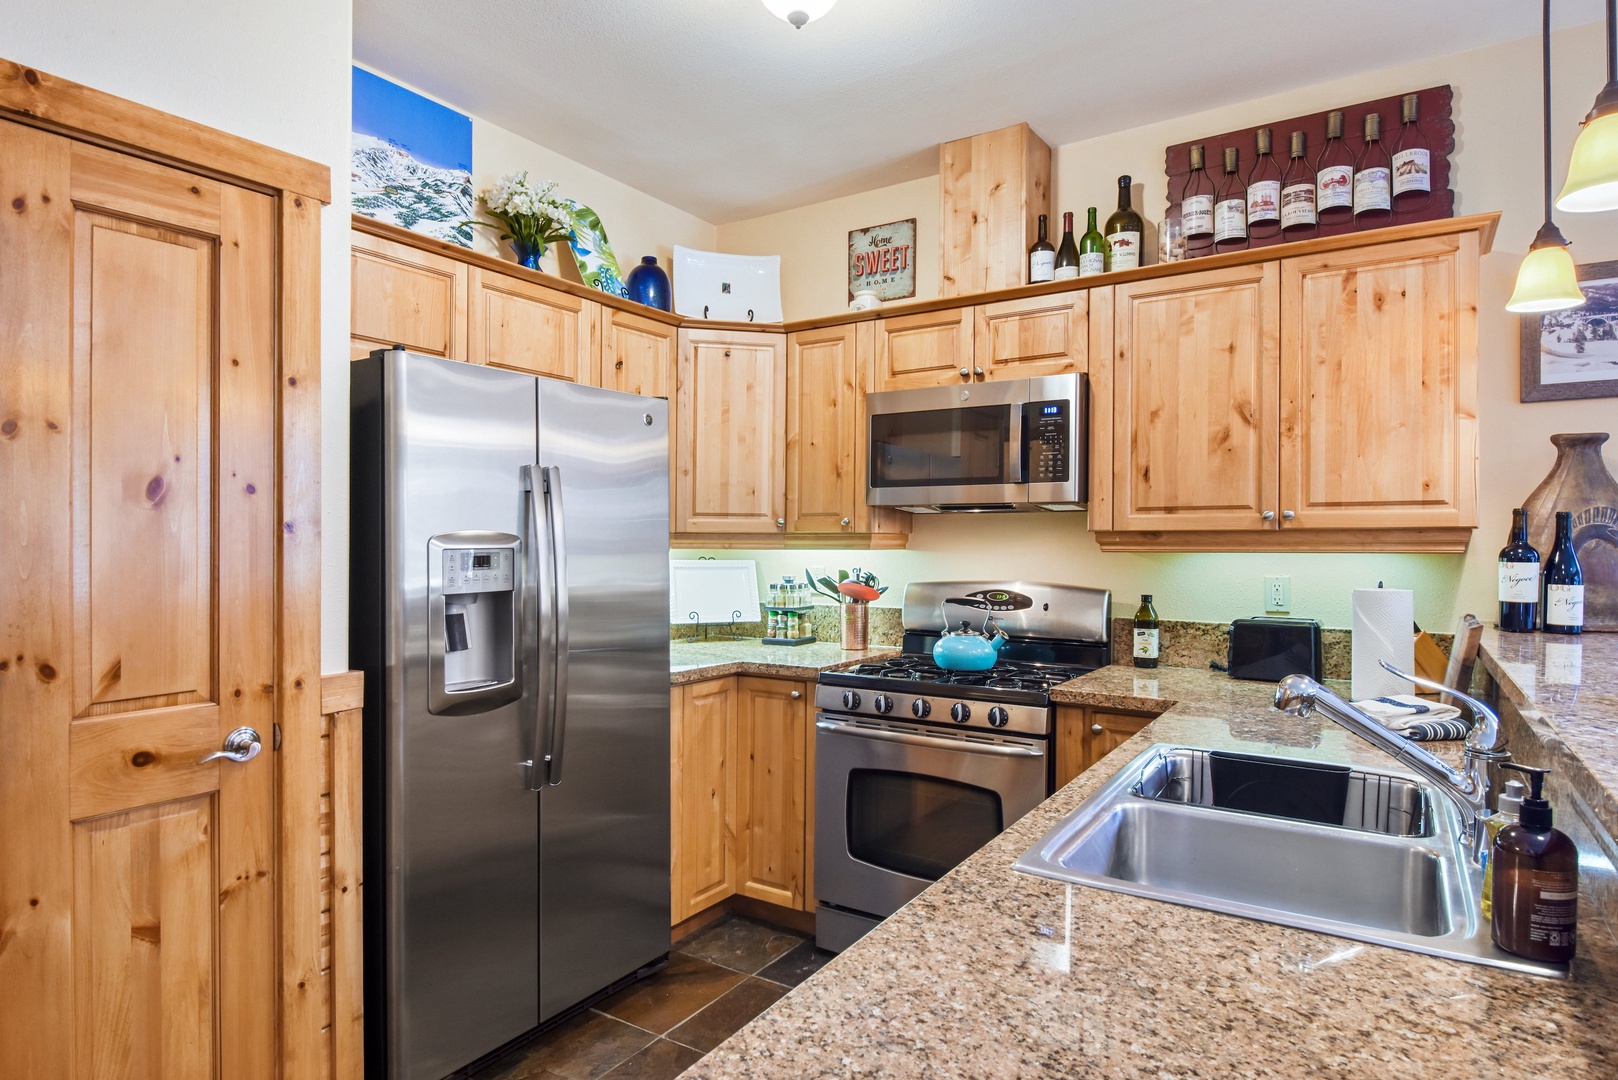 Gourmet kitchen with stainless steel appliances